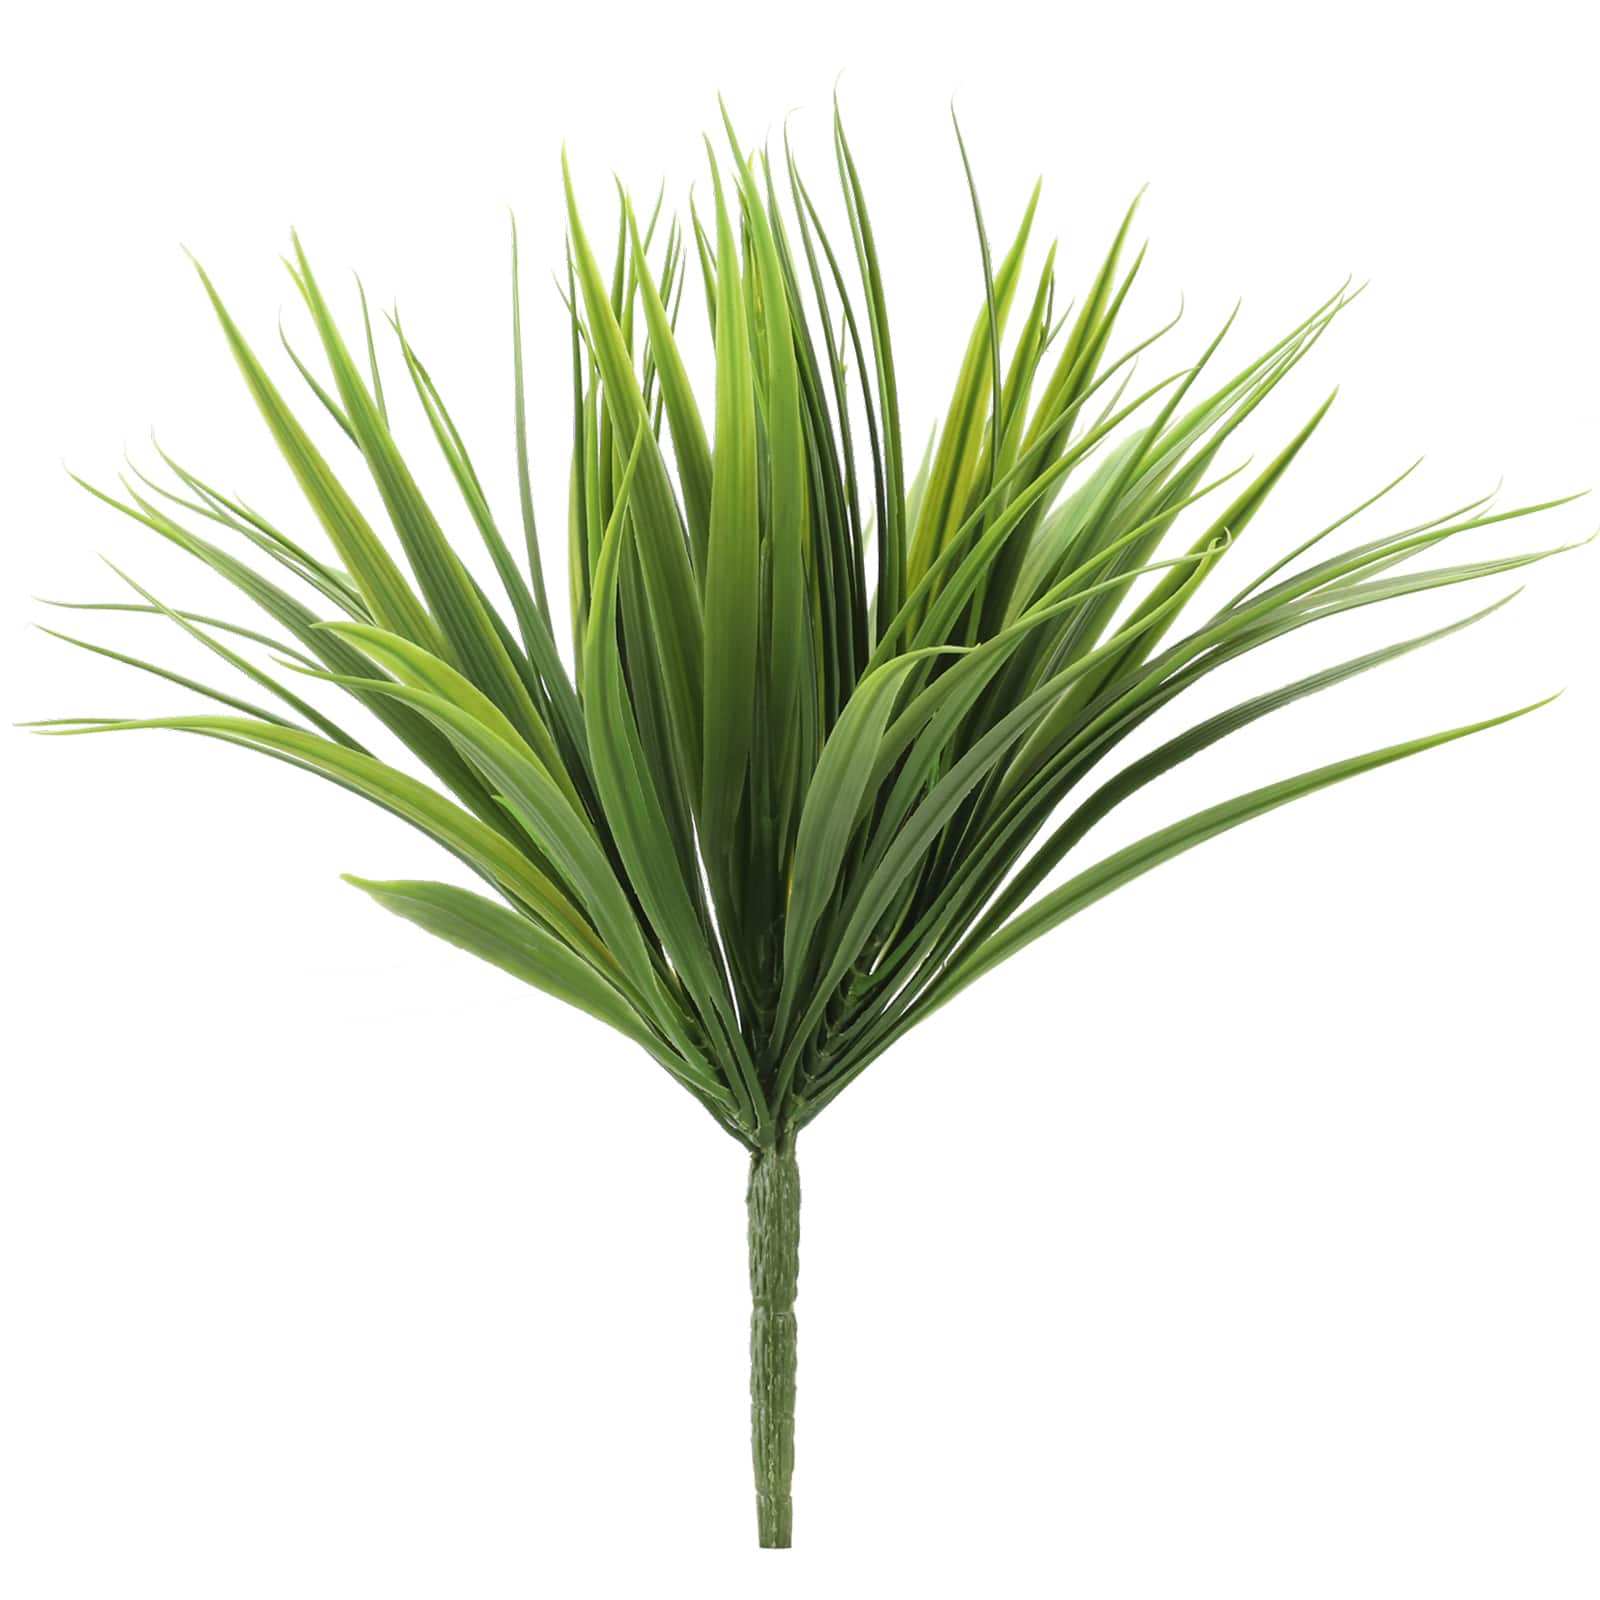 Buy the Assorted Wild Grass Bush by Ashland® at Michaels